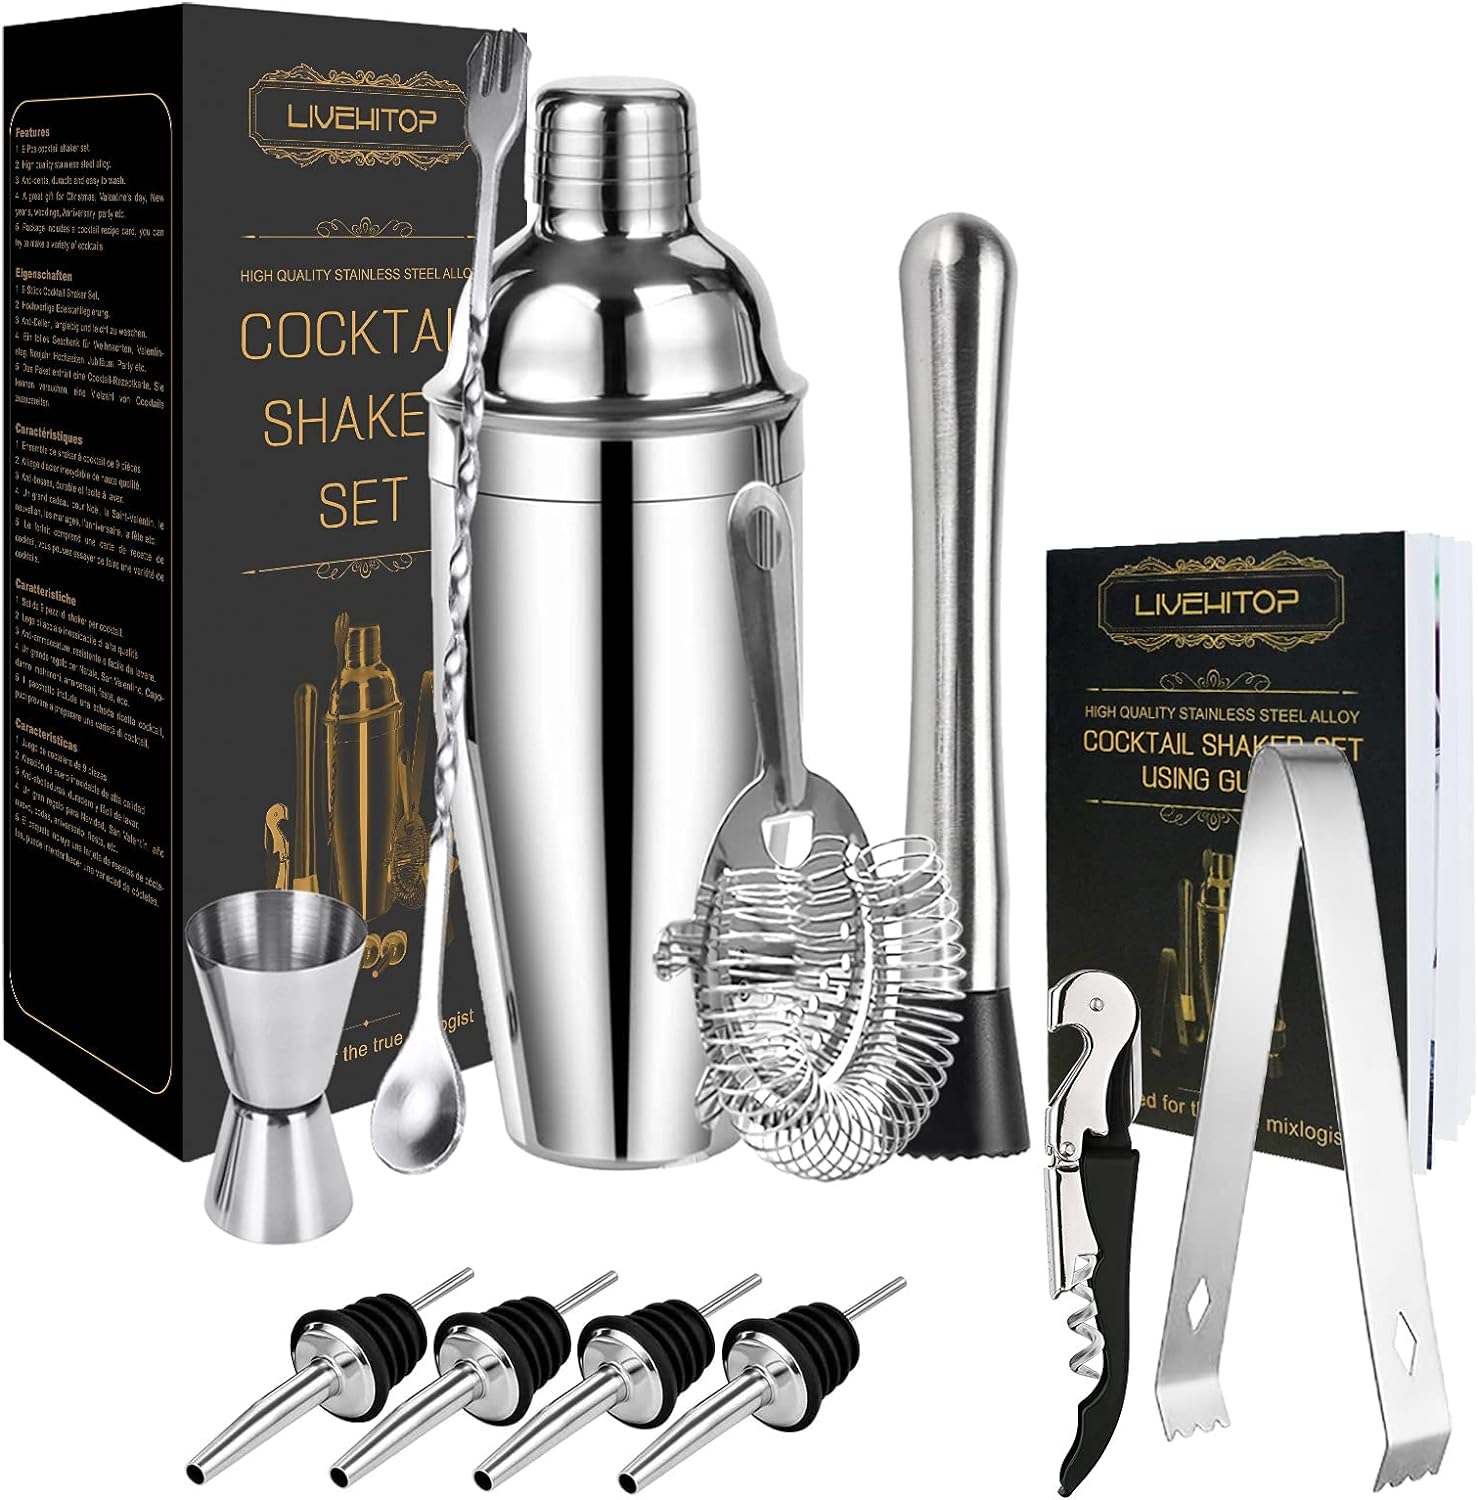 LIVEHITOP Cocktail Shaker Set, 12 Pieces Cocktail Making Set with 750 ML Cocktail Shaker Professional Bartender Kit for Bar, Party, Home